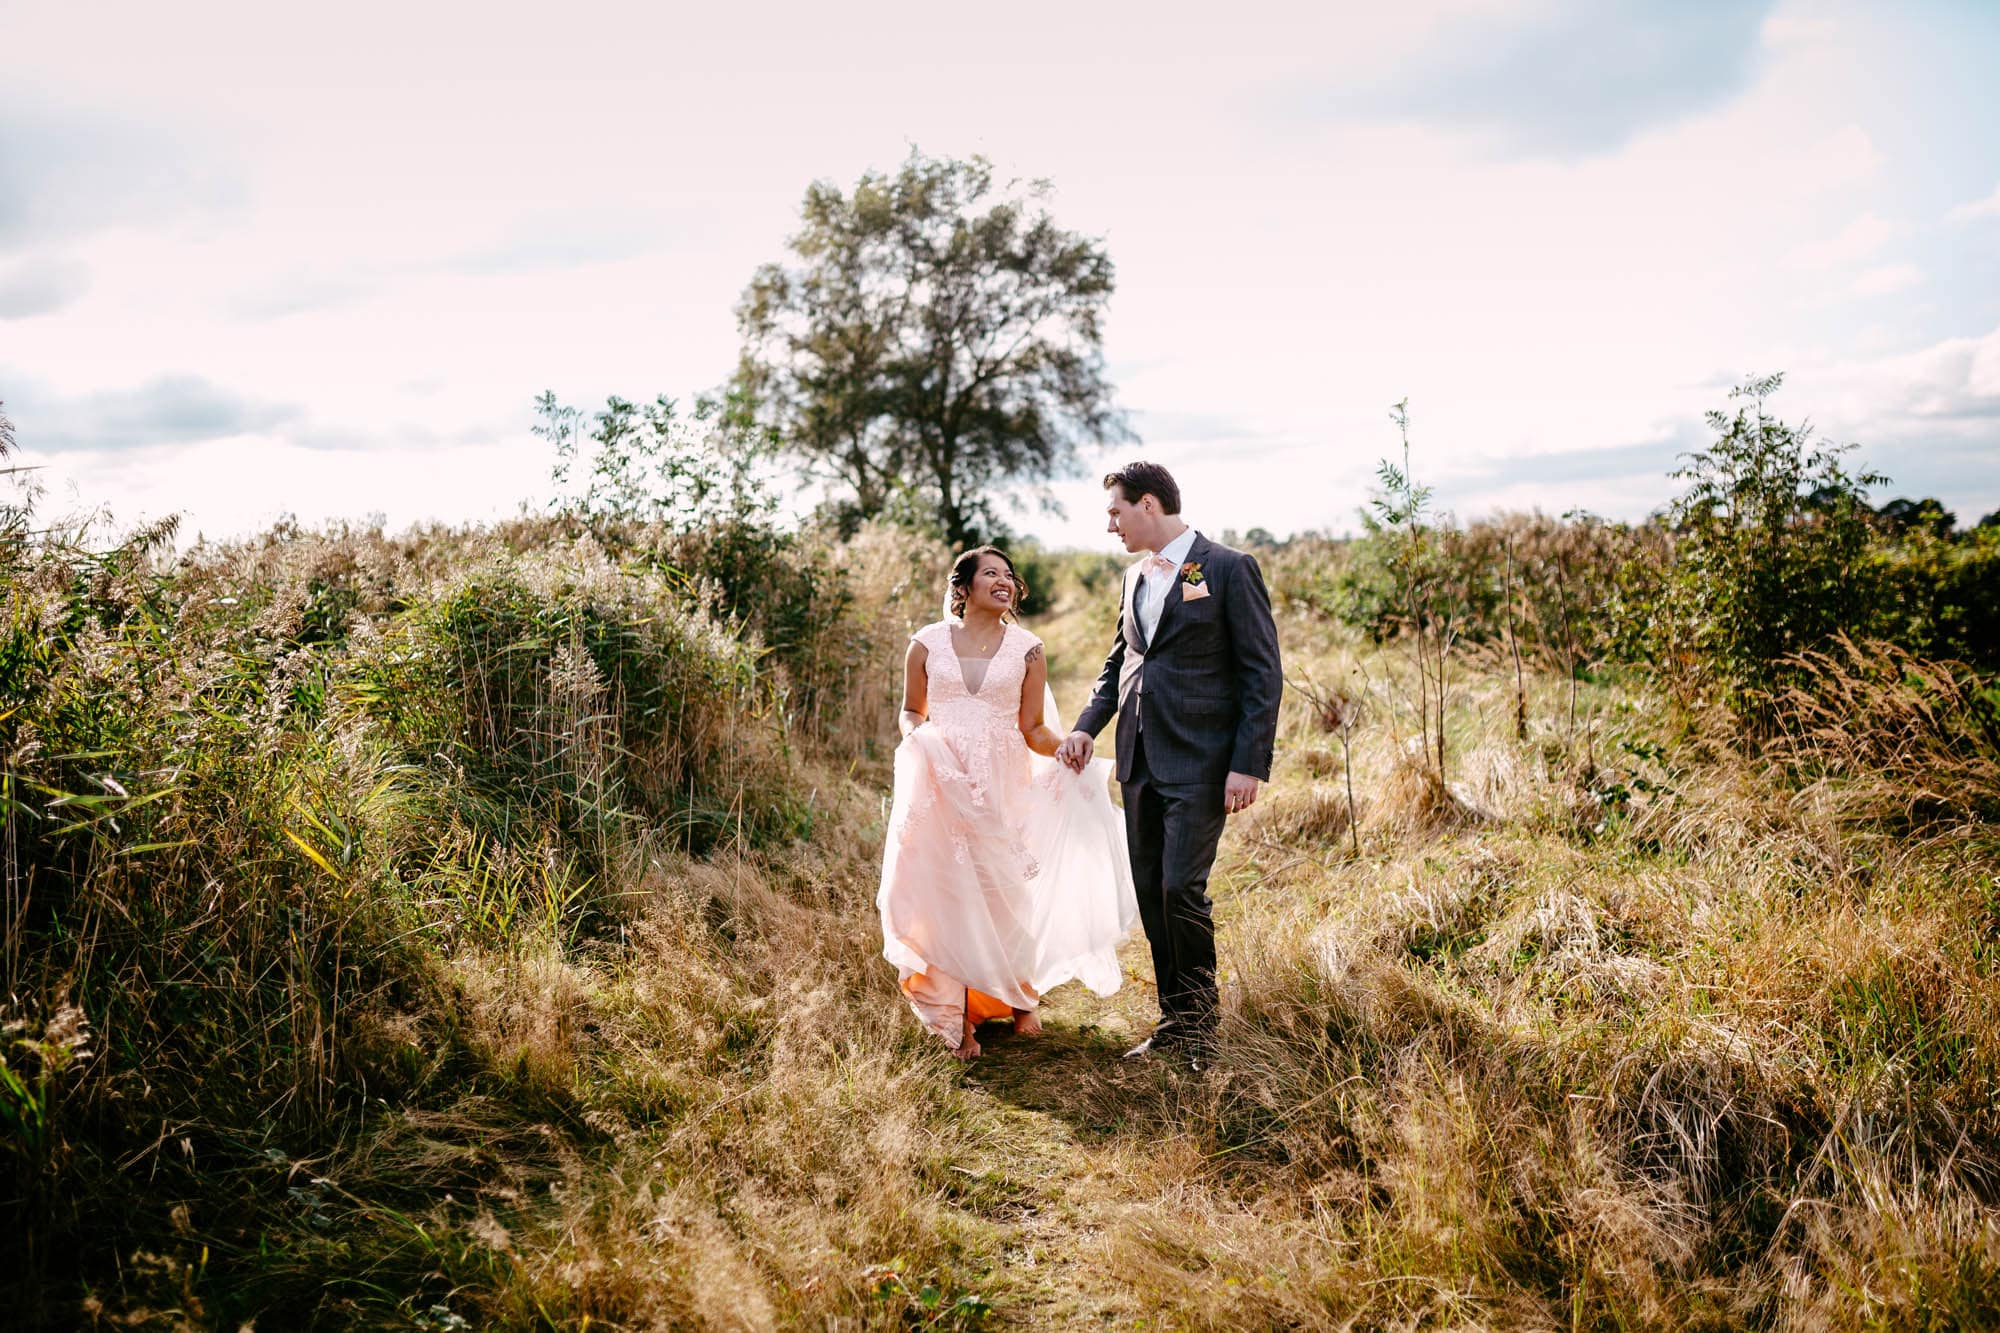 A Bohemian bride and groom walking through tall grass in a field, exuding effortless style.